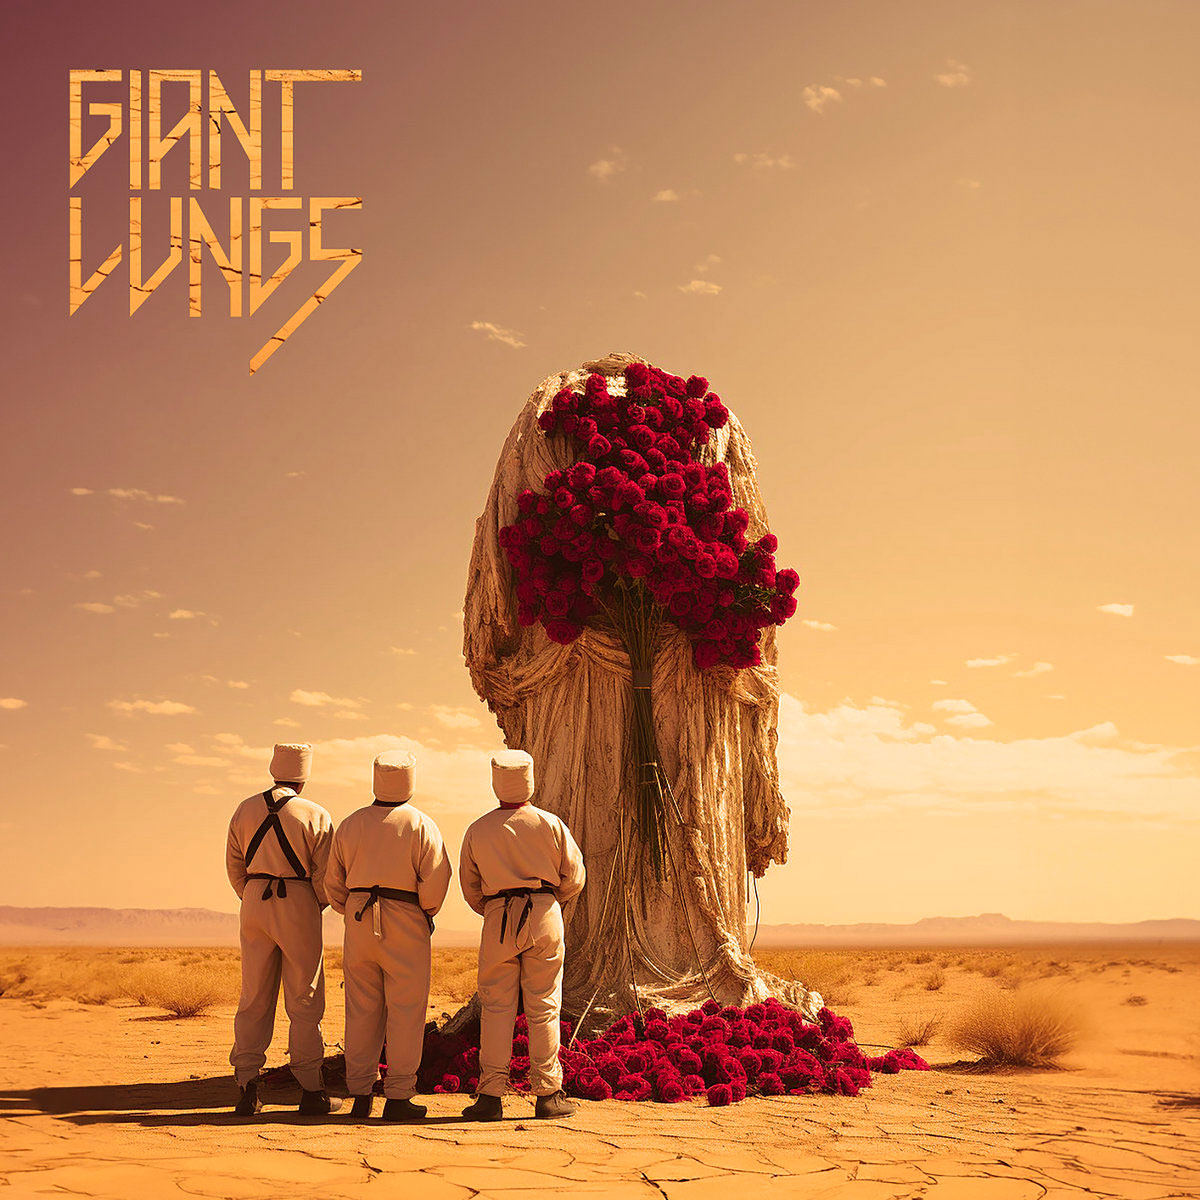 Giant Lungs by Giant Lungs